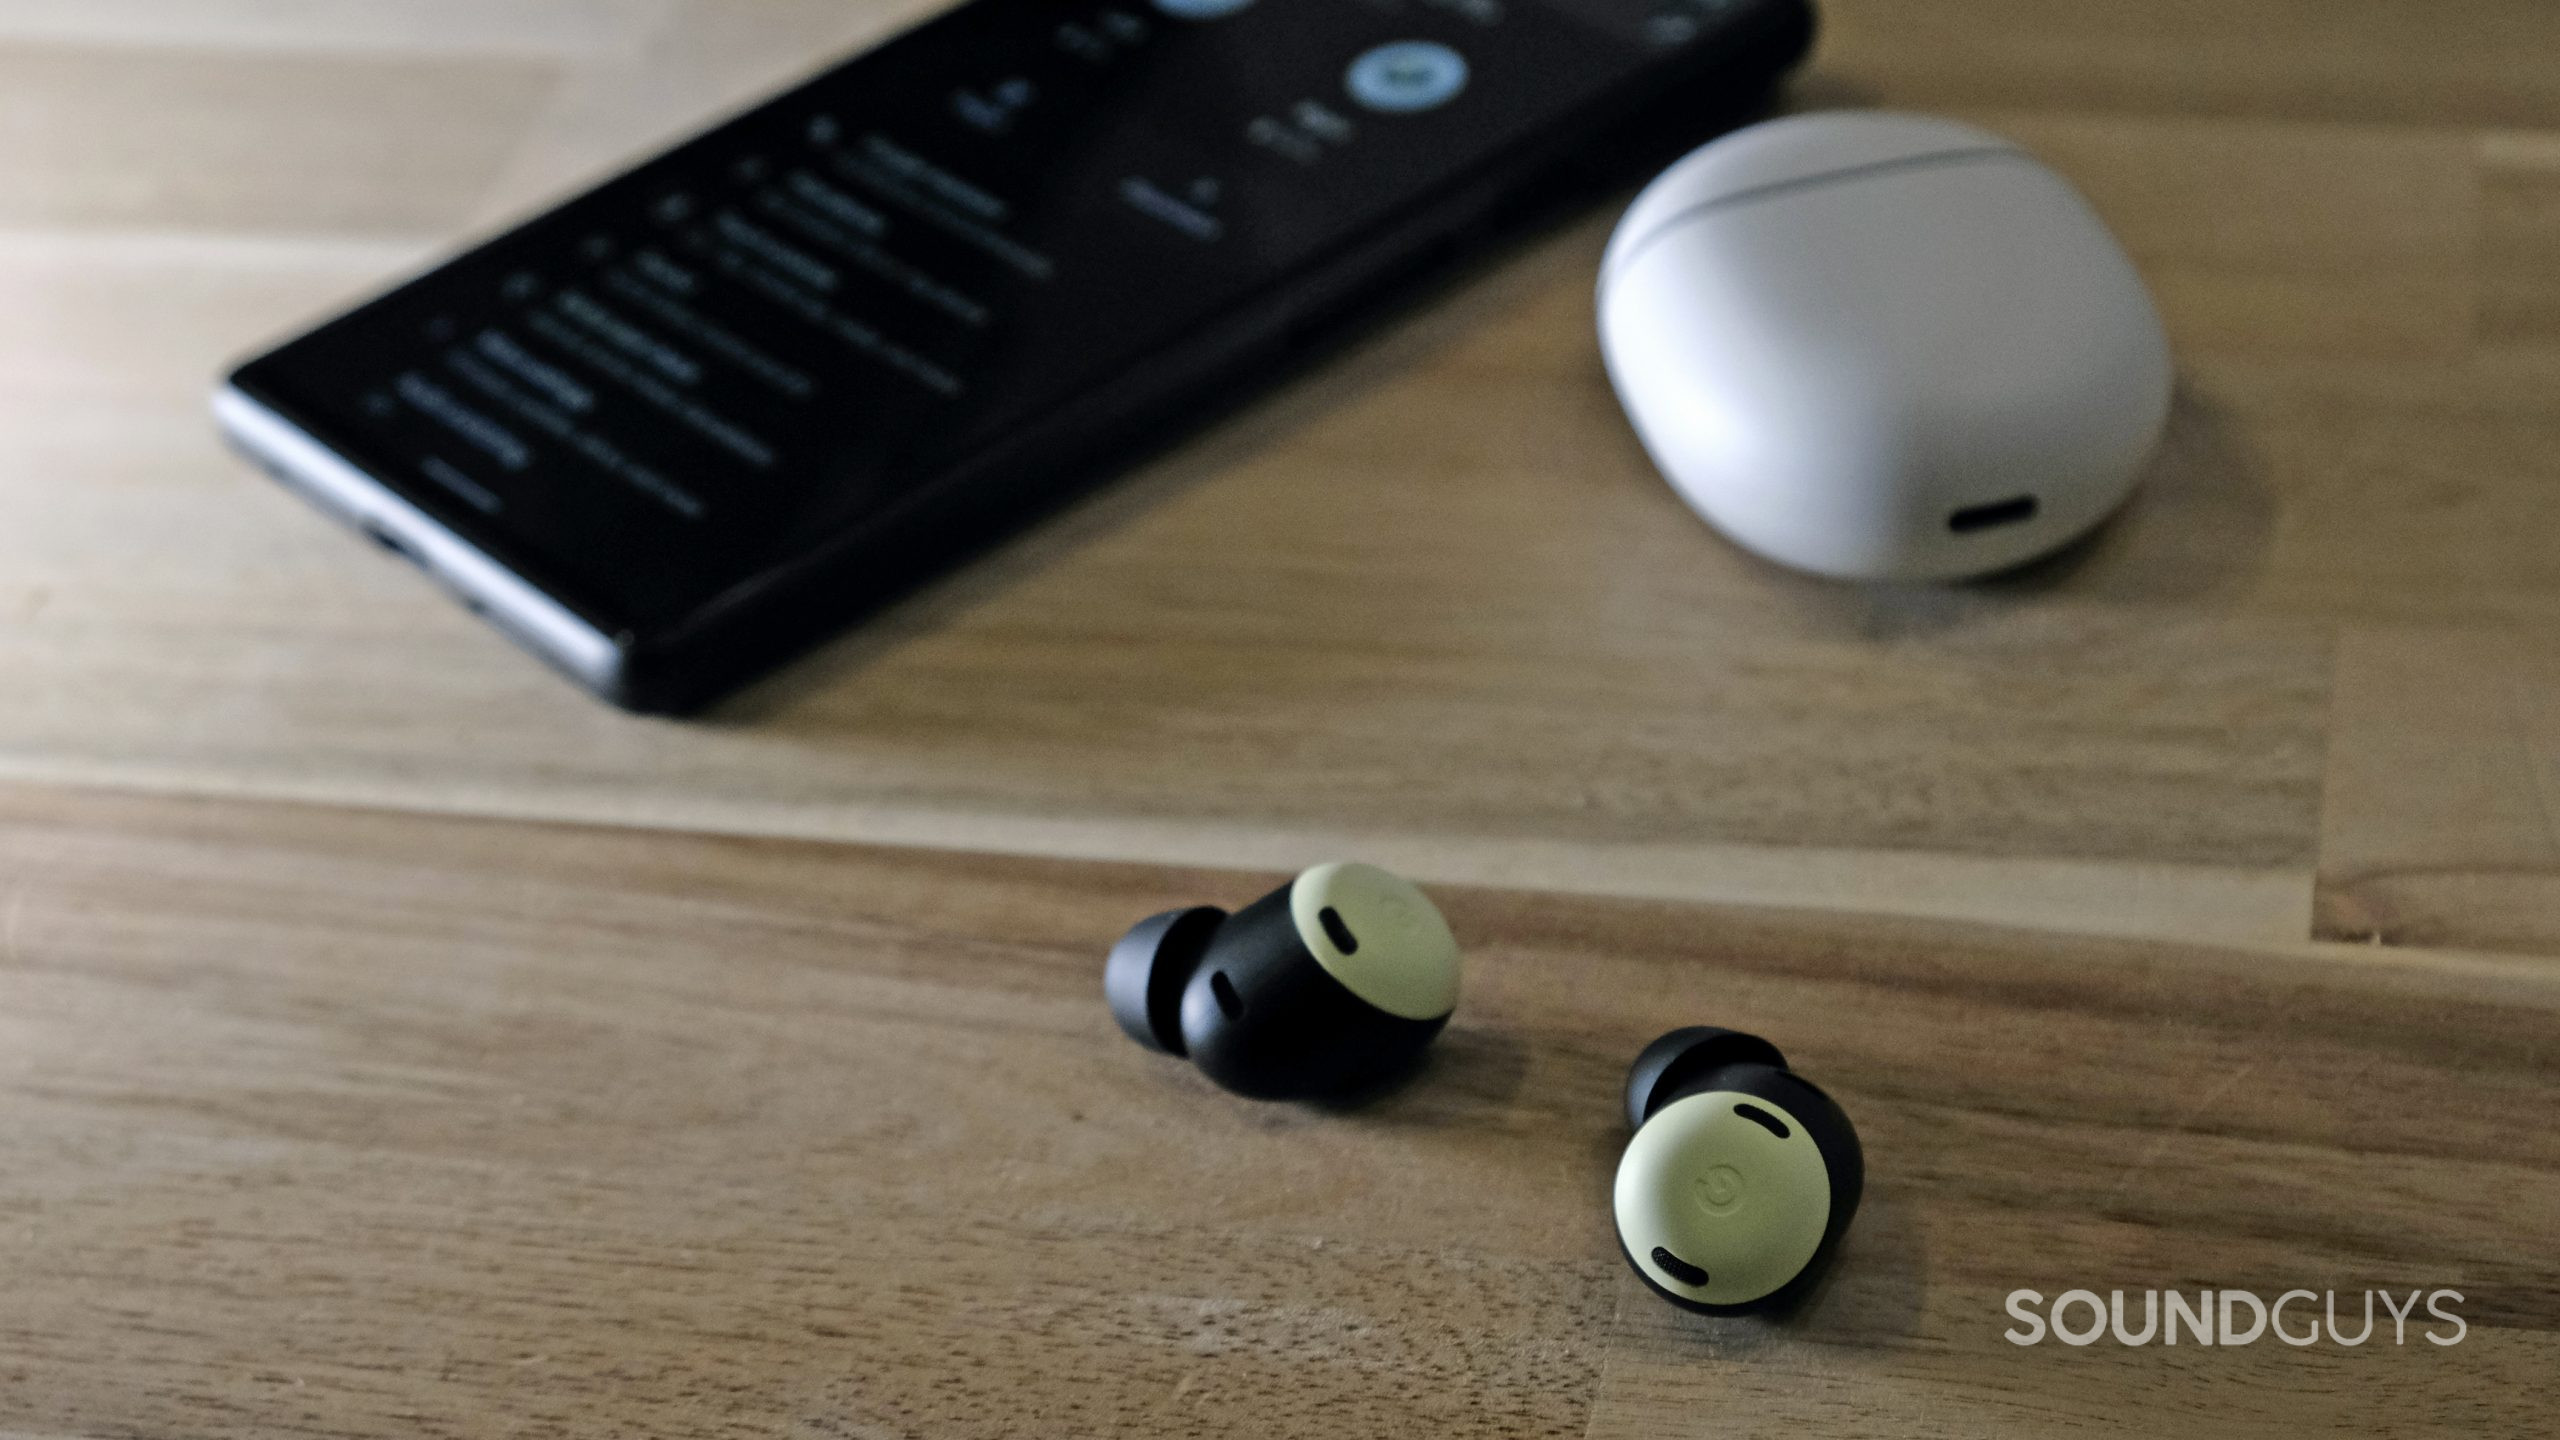 Google Pixel Buds Pro vs Apple AirPods Pro 2: what are the differences?